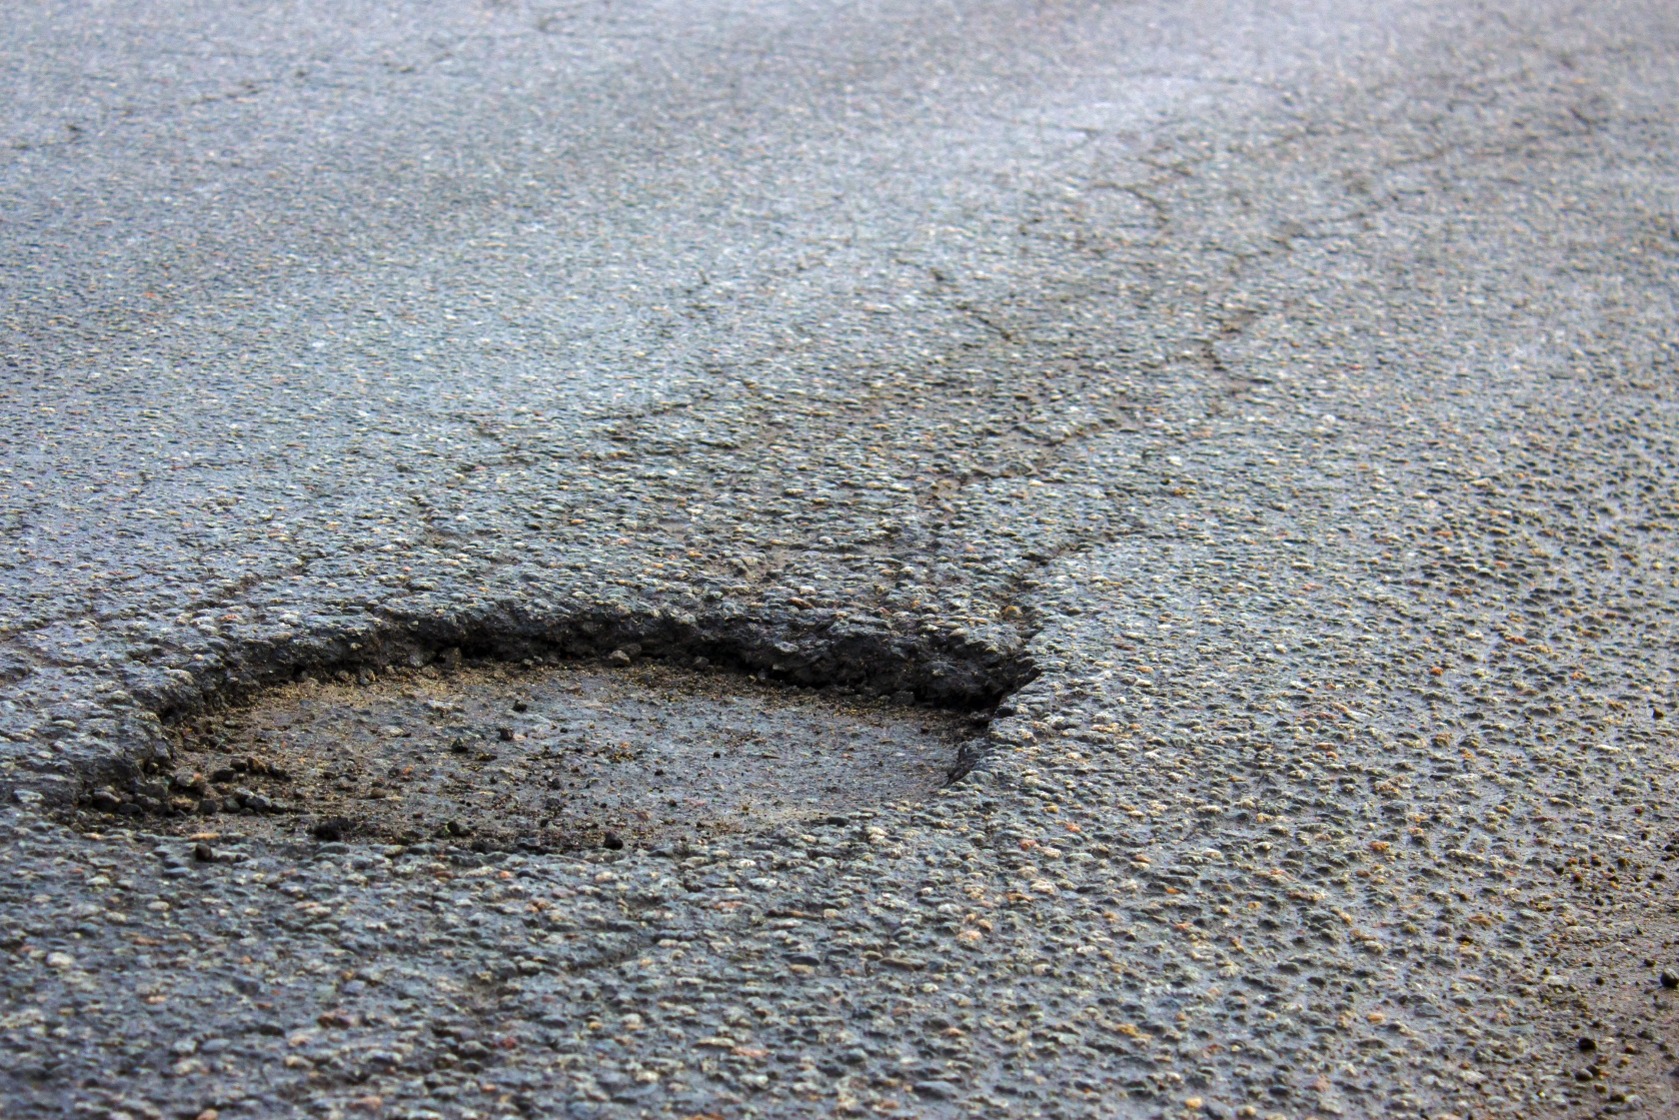 A large pothole in a road.